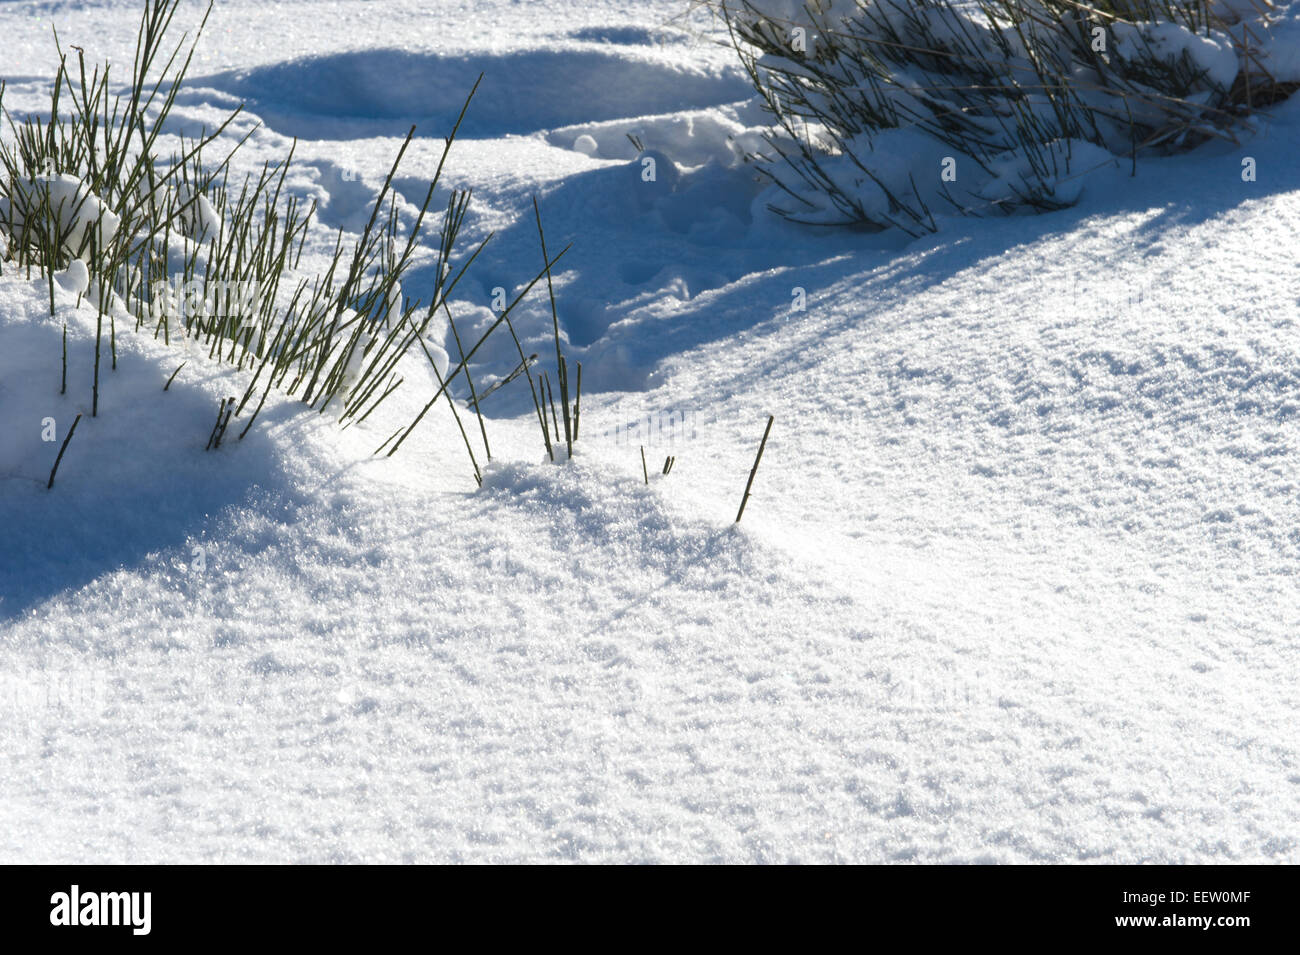 late afternoon sunshine picks out the crystal details of snow around tussocks of reed grass in a remote scottish glen Stock Photo